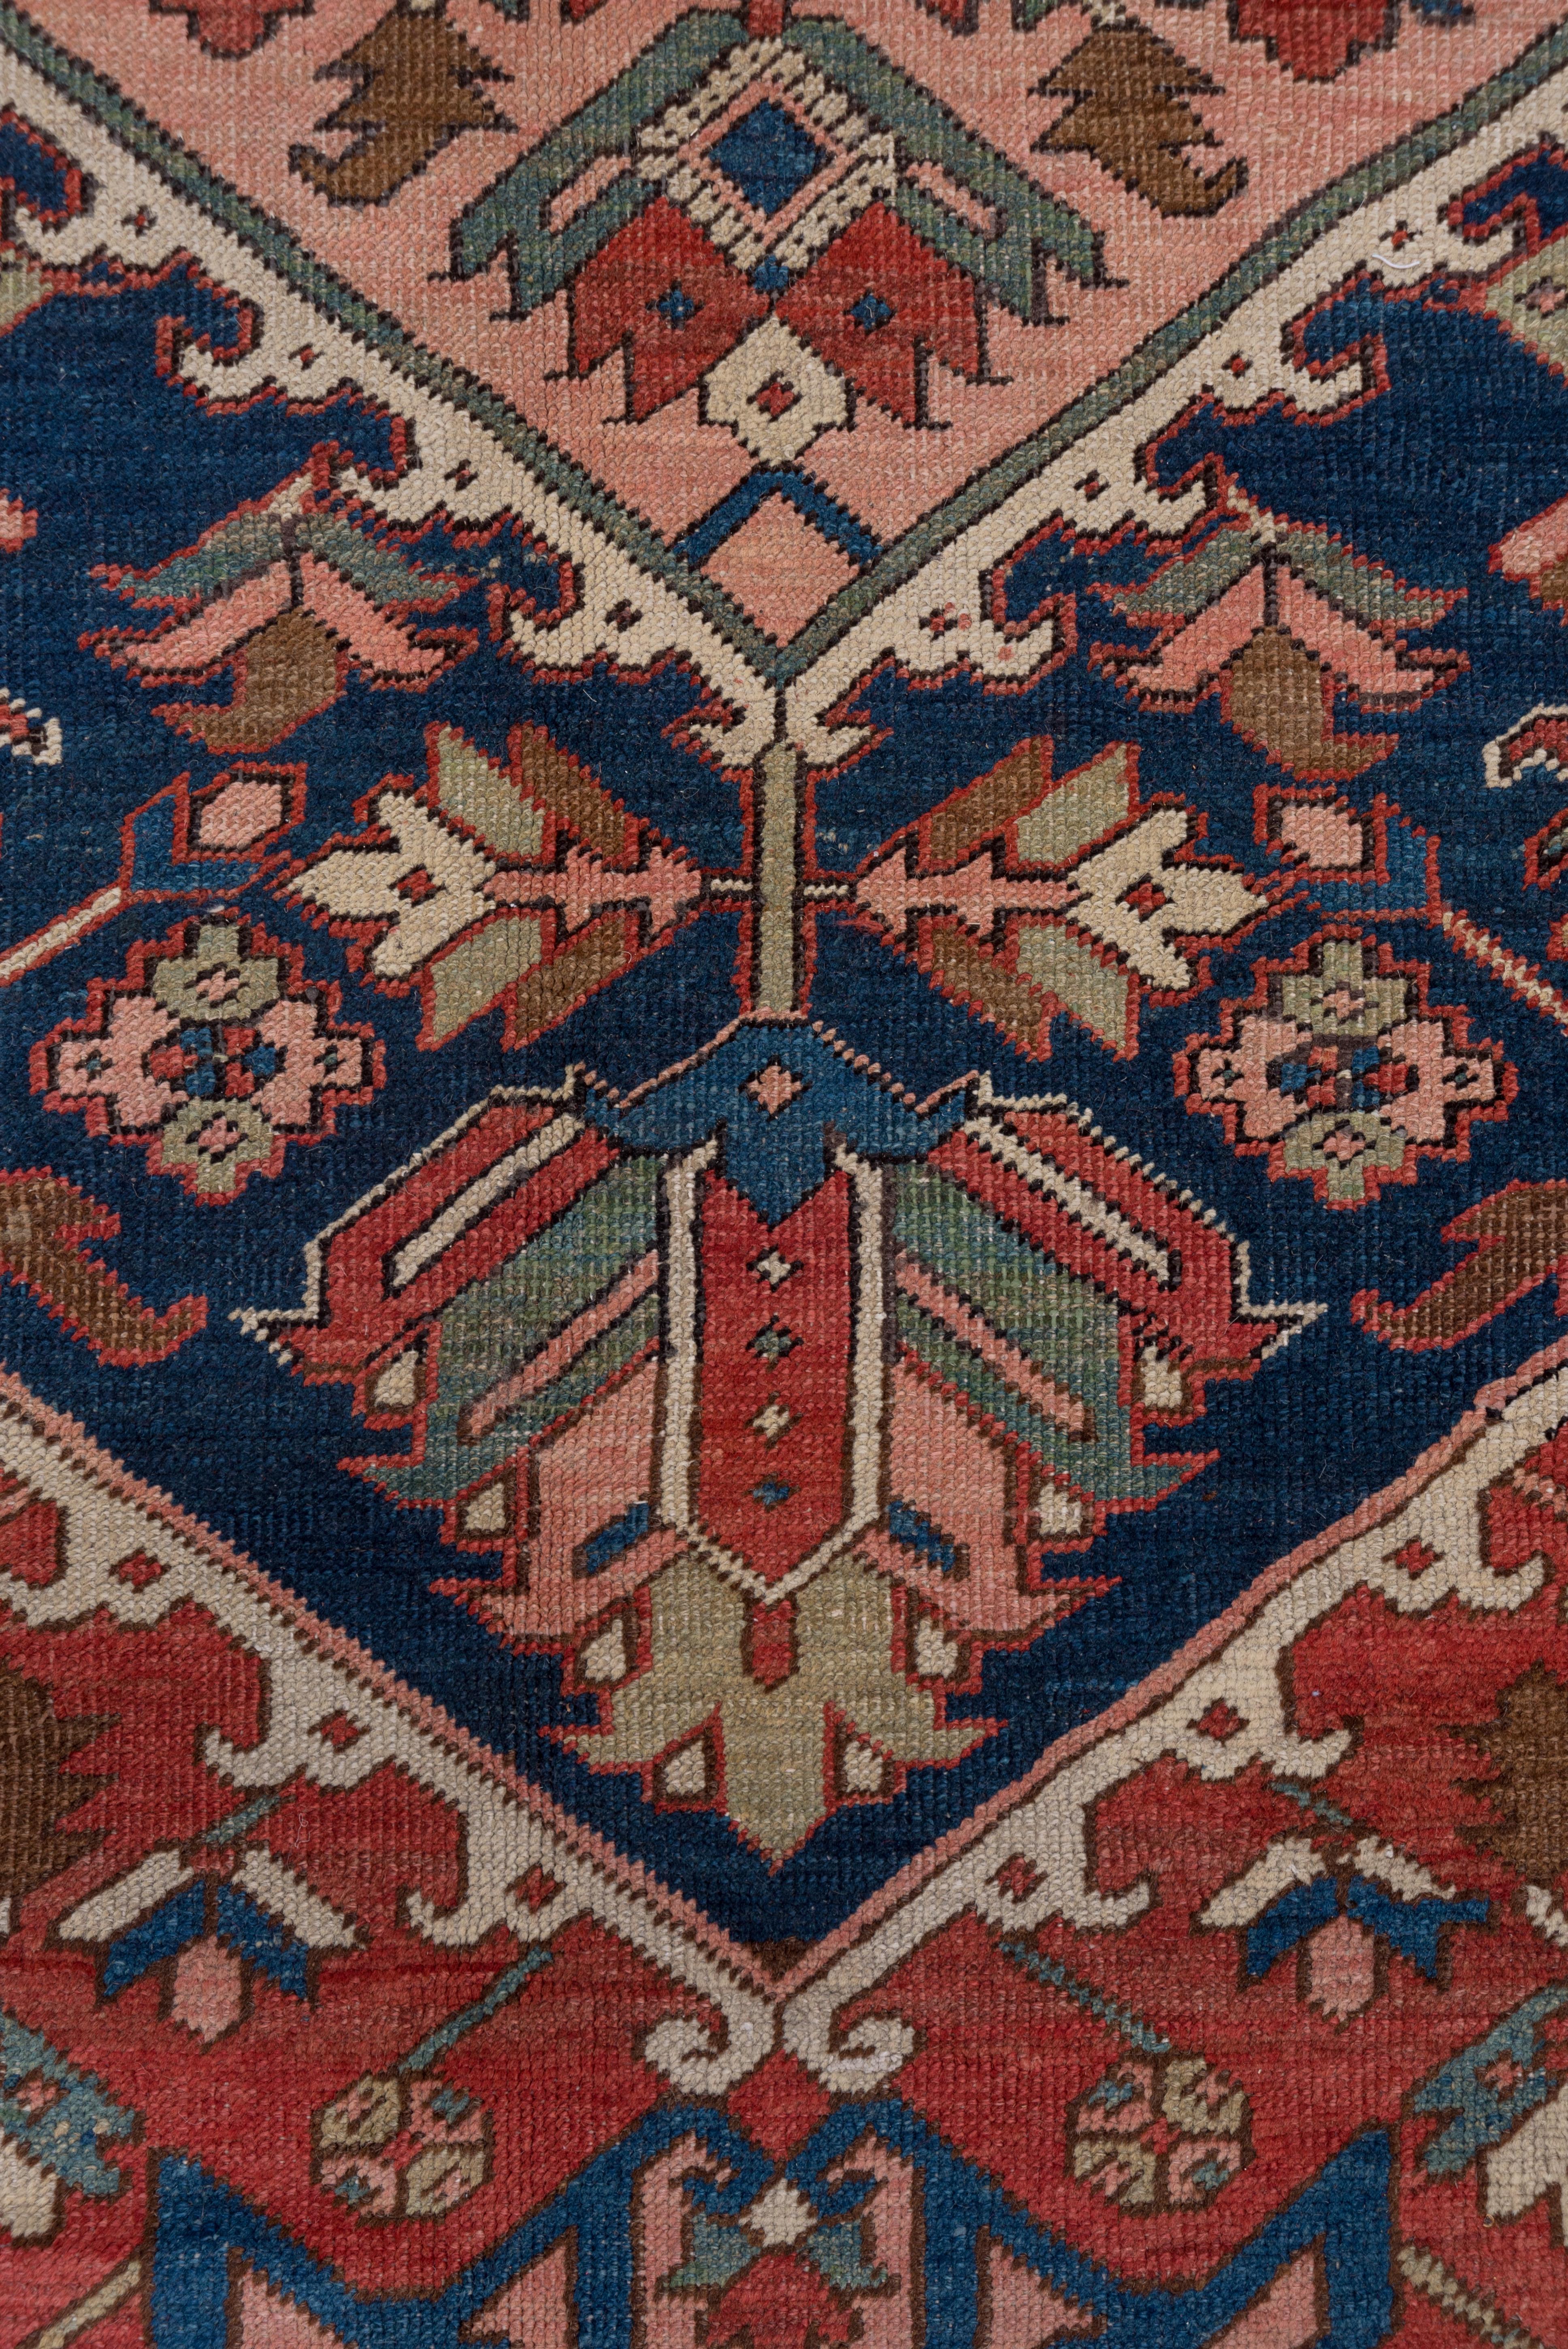 This high Serapi quality NW Persian rustic carpet in all natural dyes shows broad, conjoint, flower-filled cream corners, setting forth the tomato red field with an inner hook fringe and a dark blue lozenge medallion with a sub-medallion sprouting